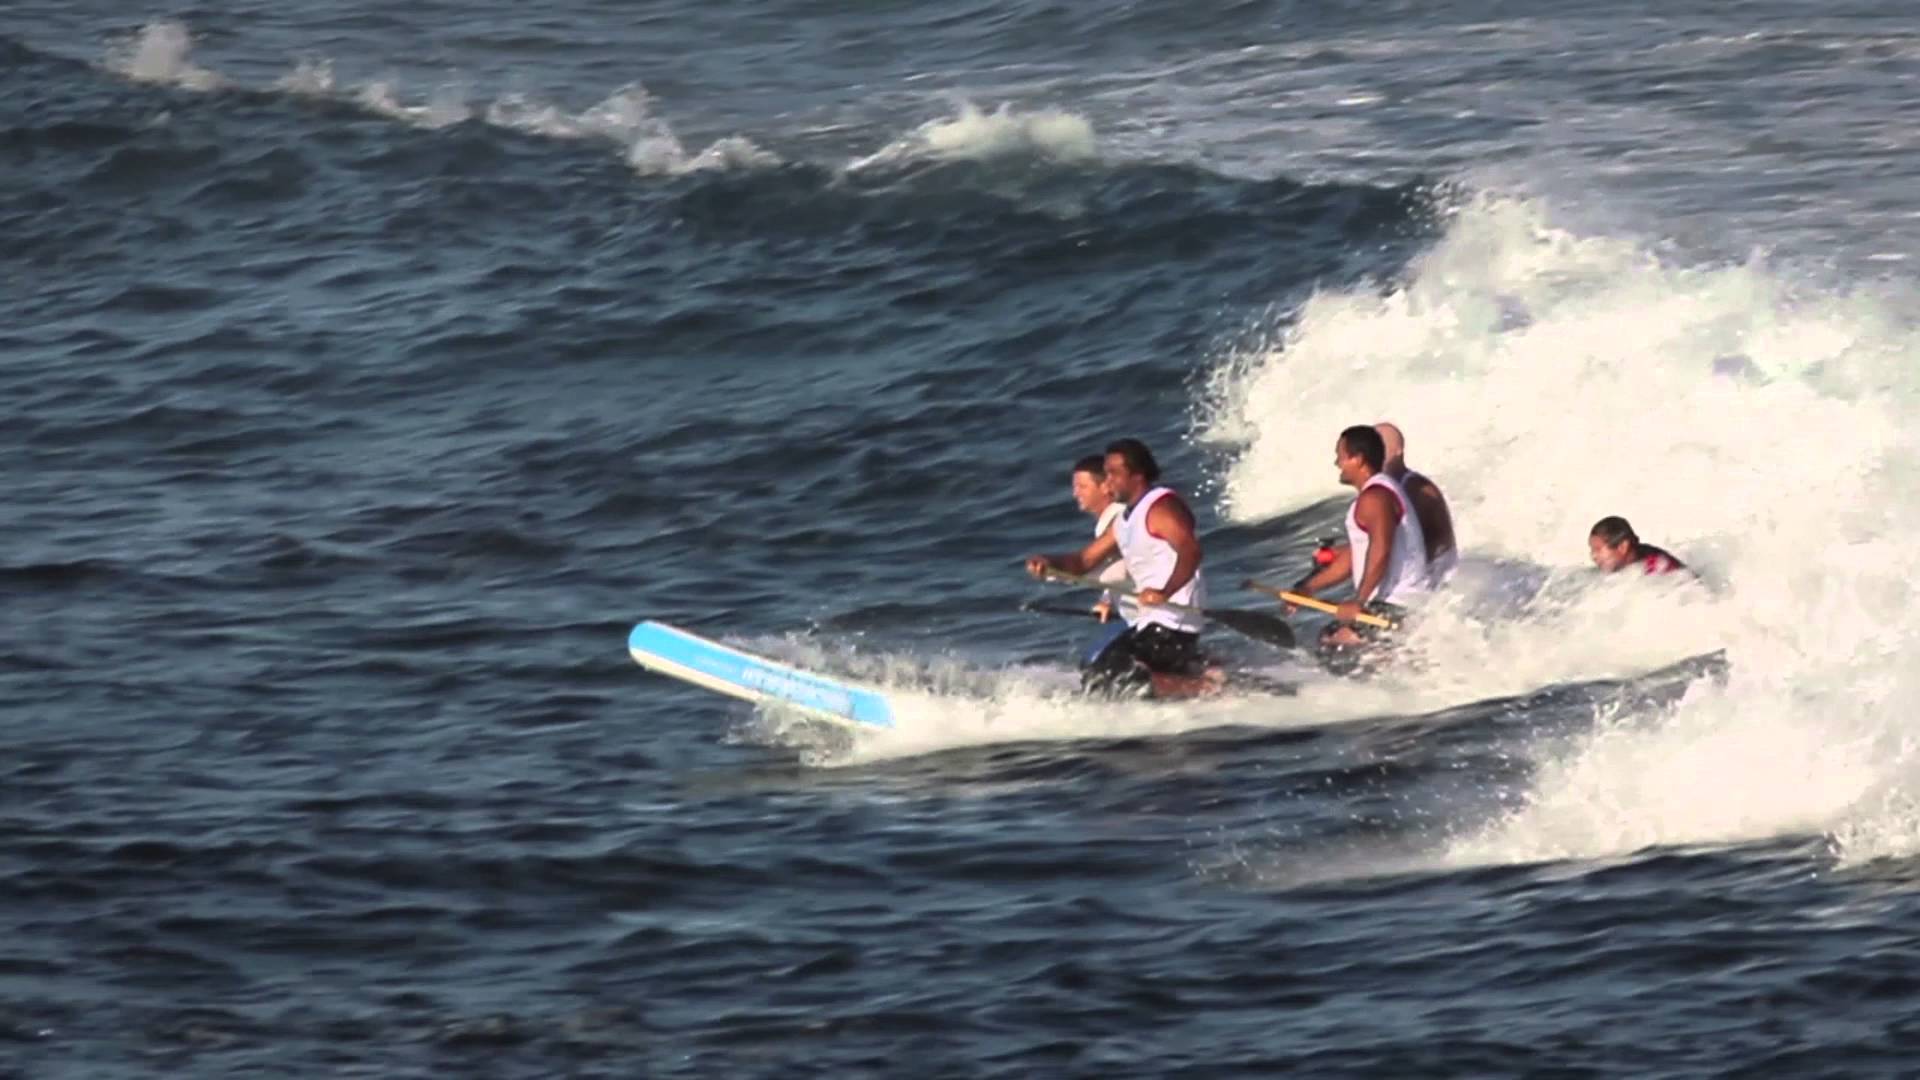 Dave Kalama and his friends try the Invader Board